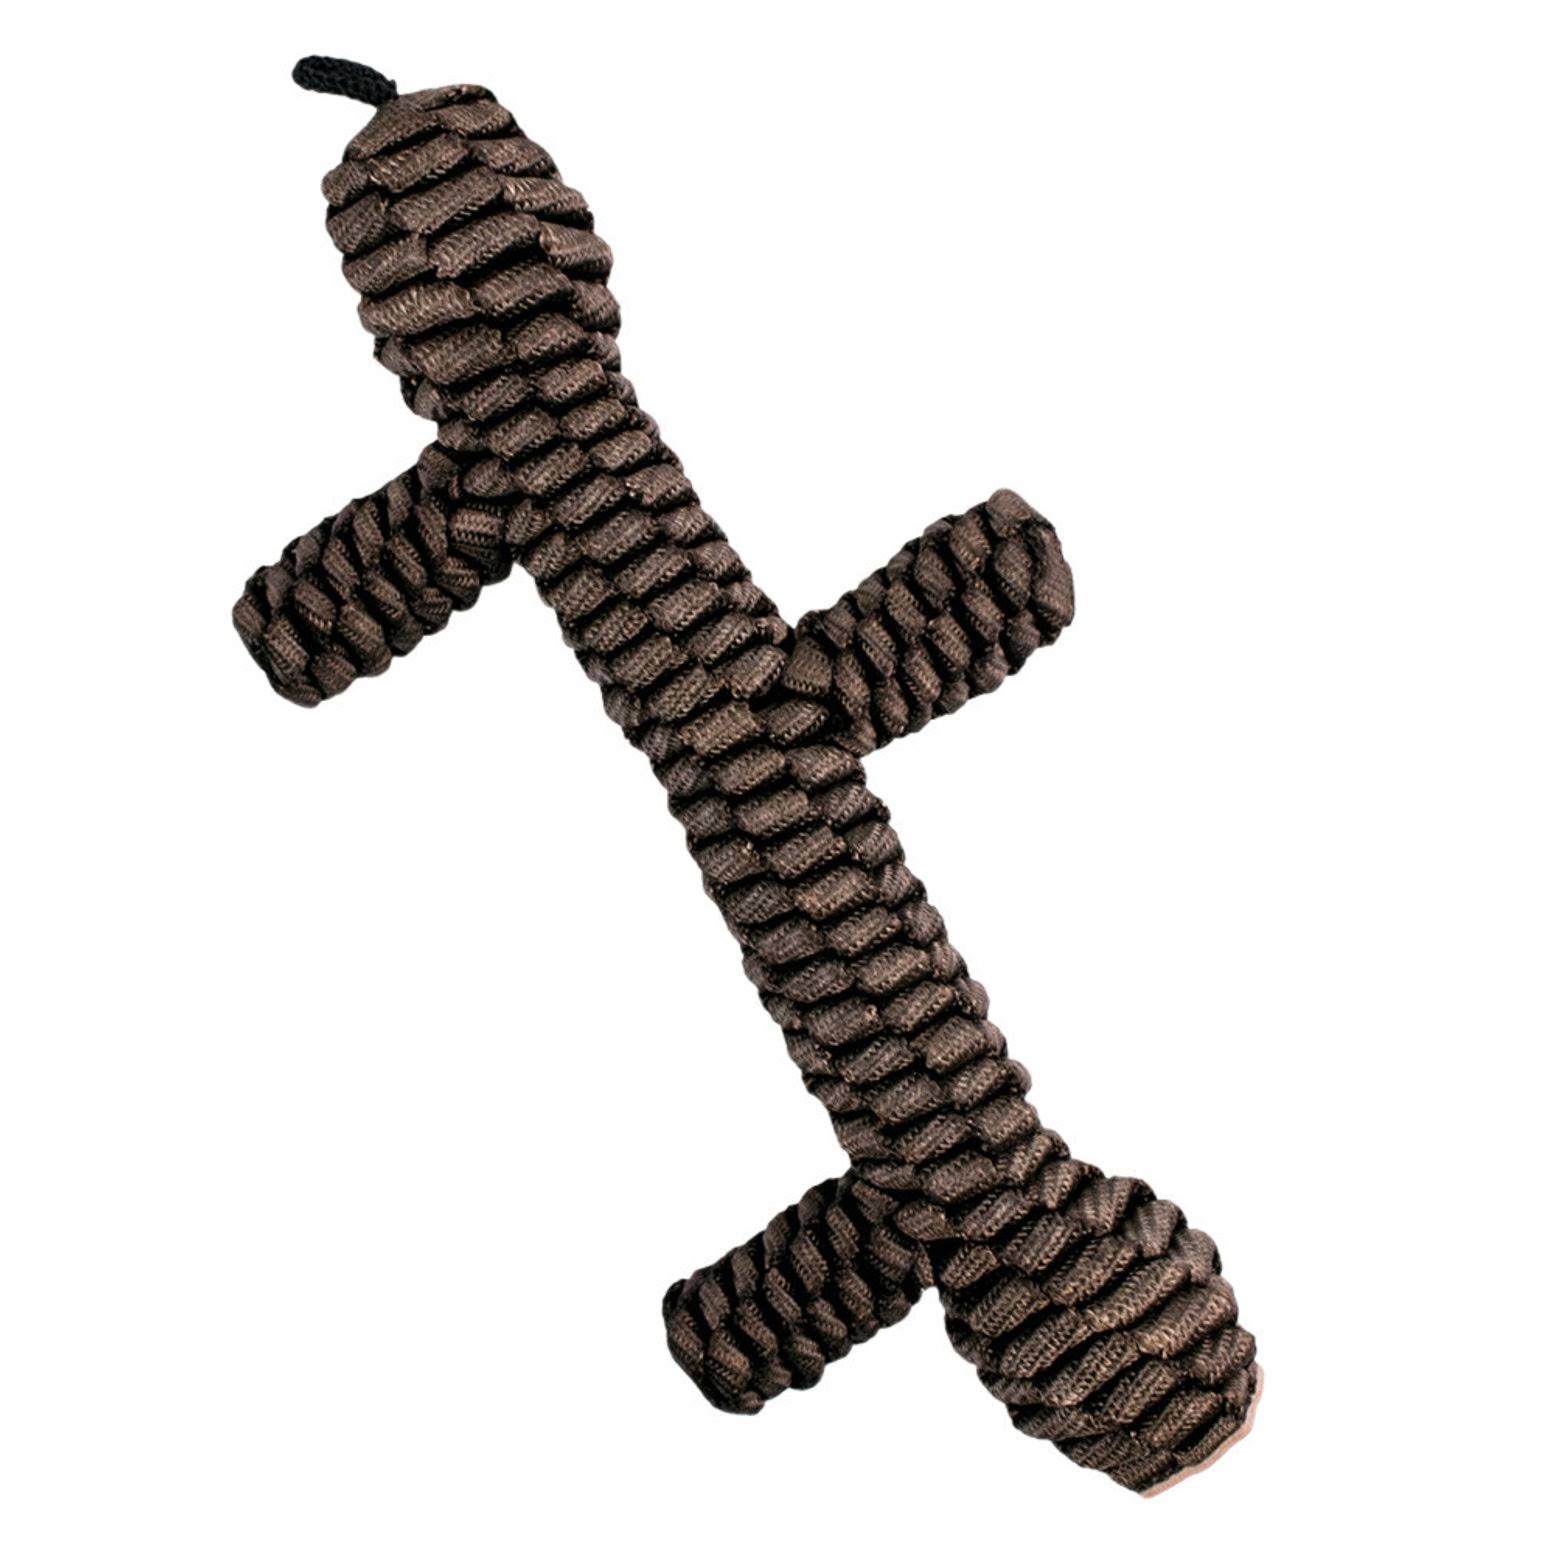 Tall Tails Braided Stick Dog Toy, Brown, 9-in